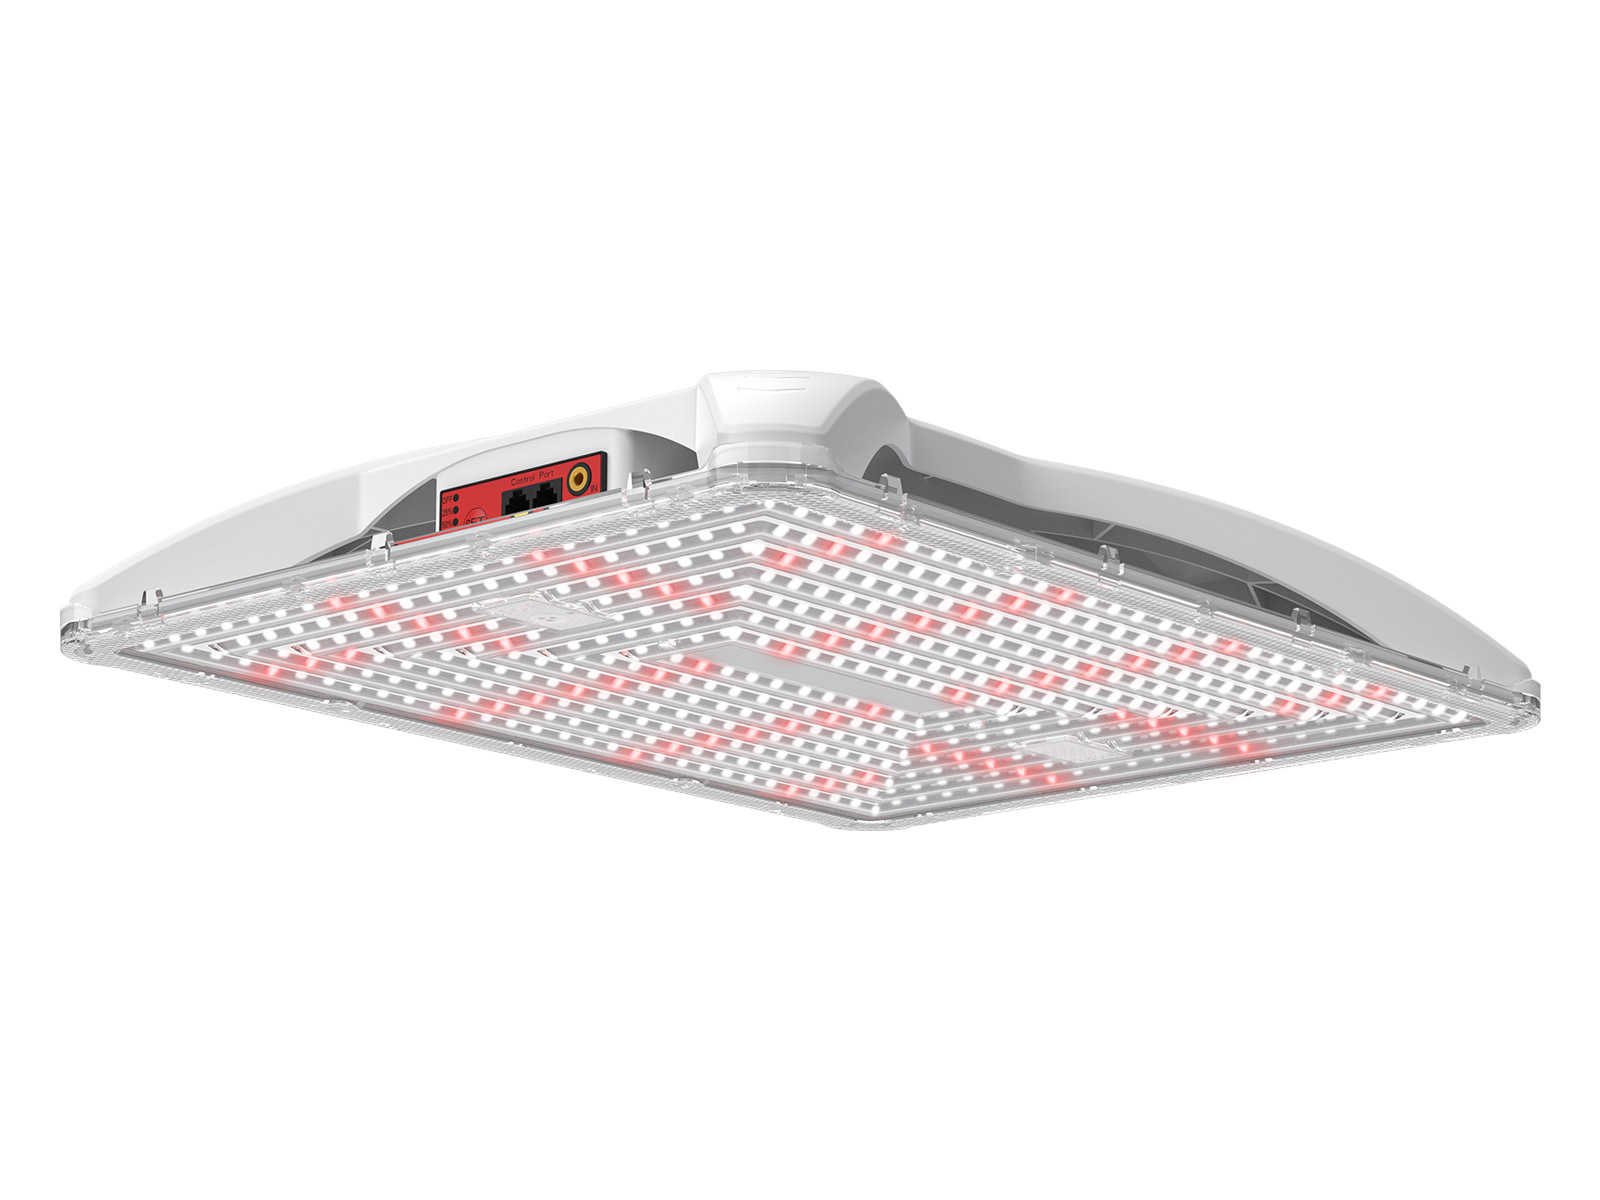 HL26 Horti-Drone lLED Grow Light